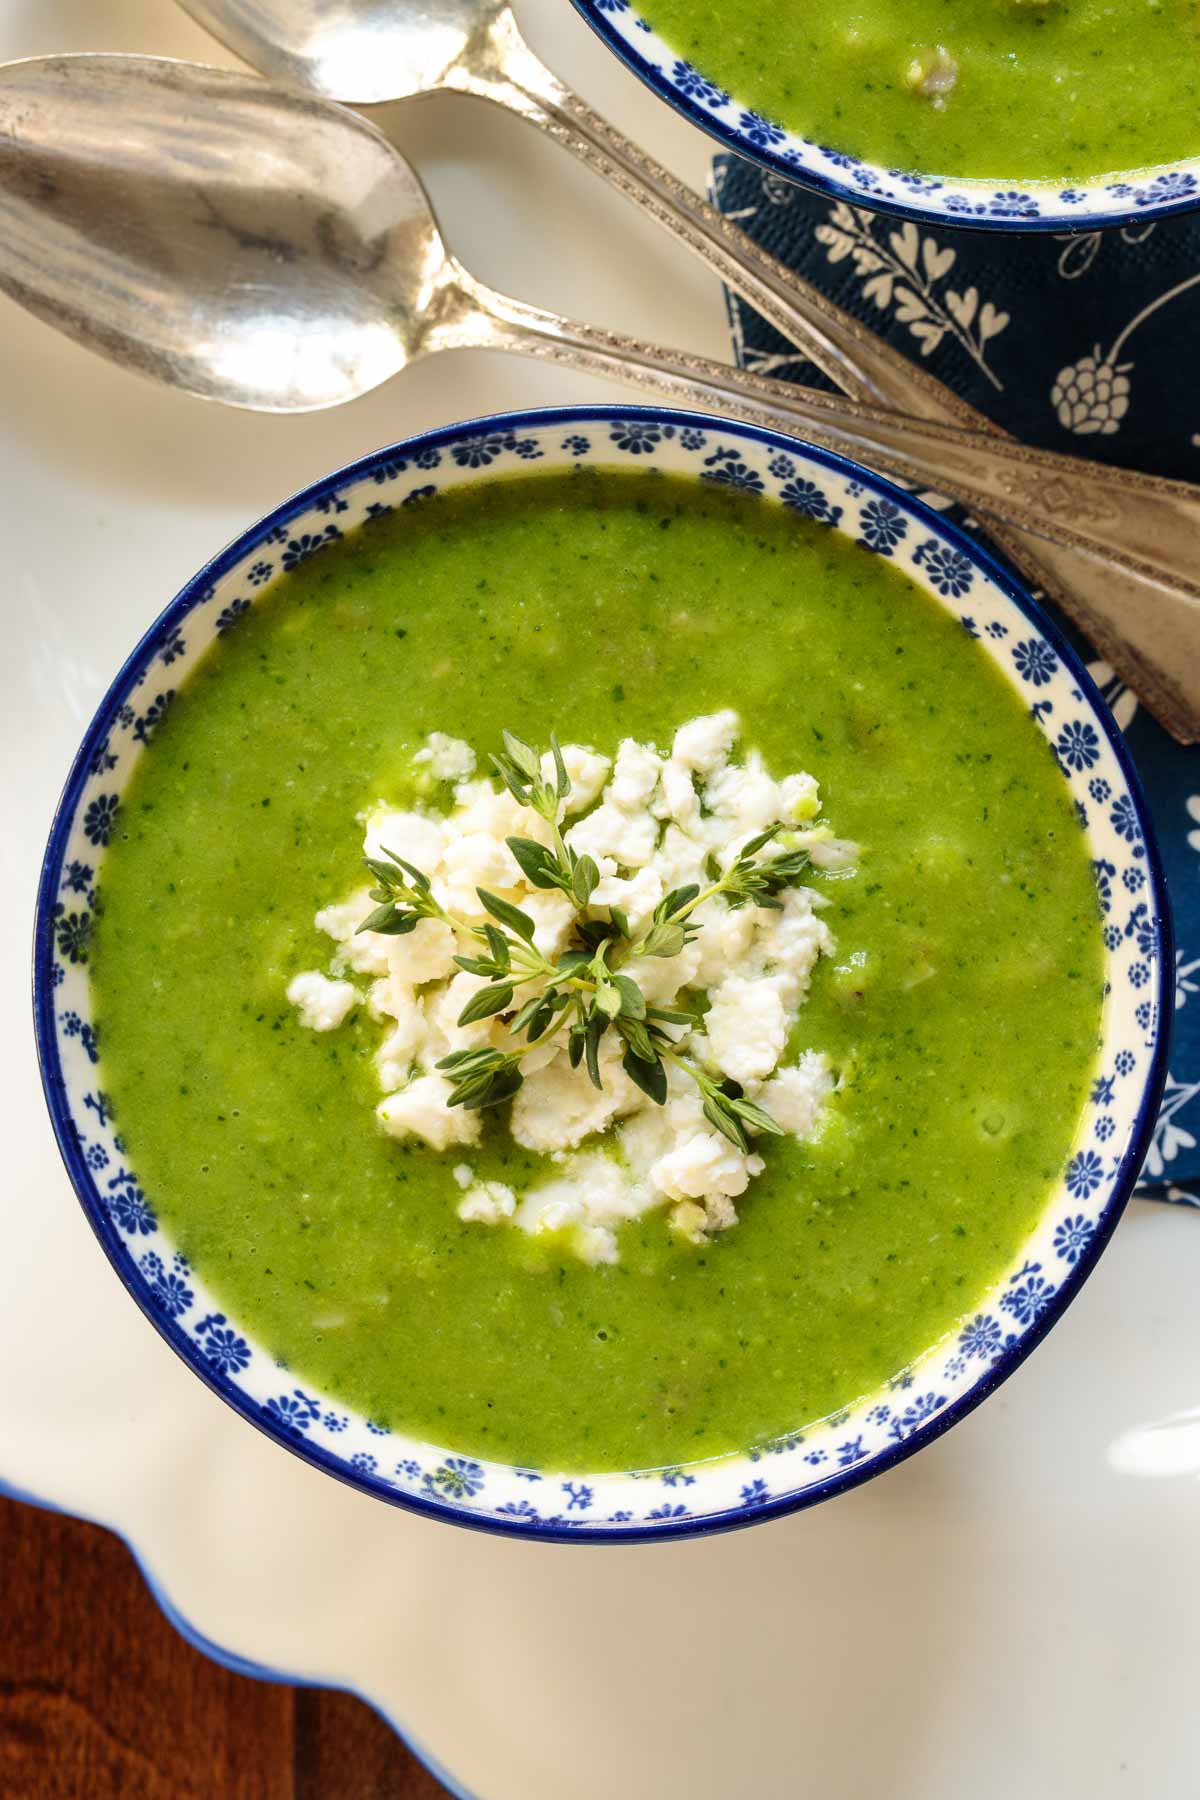 Ham and Fresh Pea Soup - A delicious new take on an old classic!